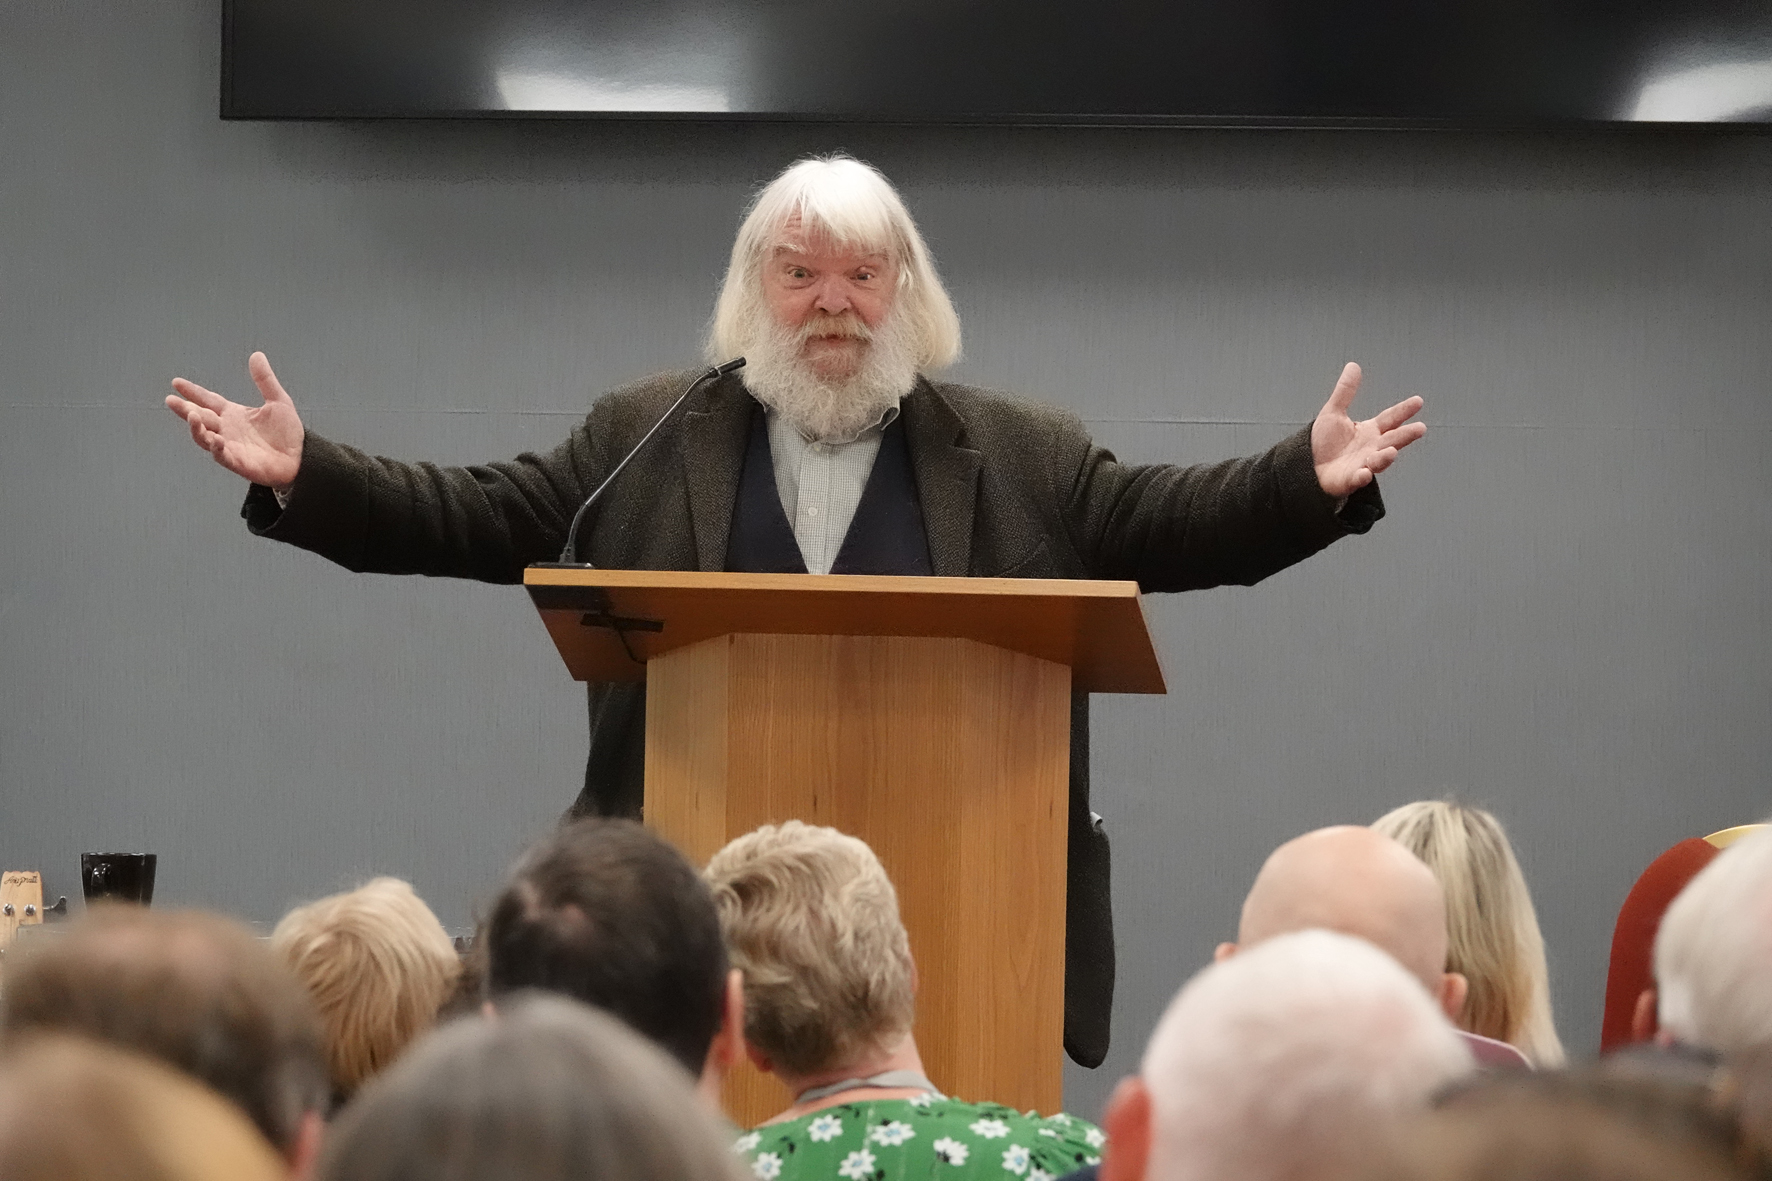 Malcolm Guide speaking with his arms outstretched at the clergy conference